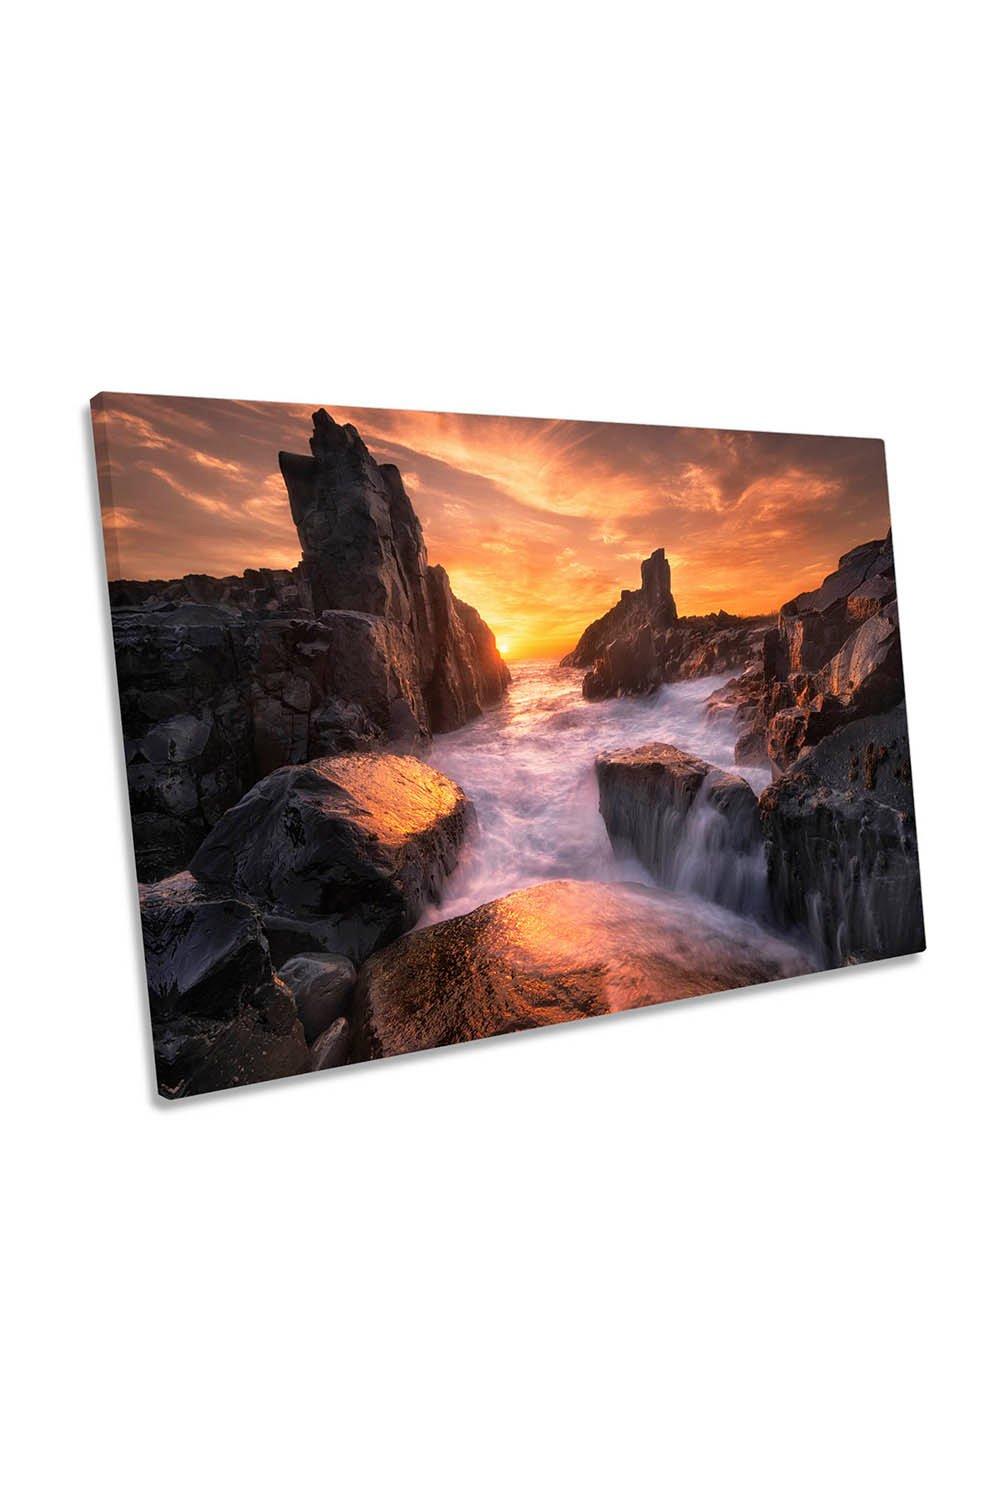 The Edge of the World Orange Sunset Canvas Wall Art Picture Print